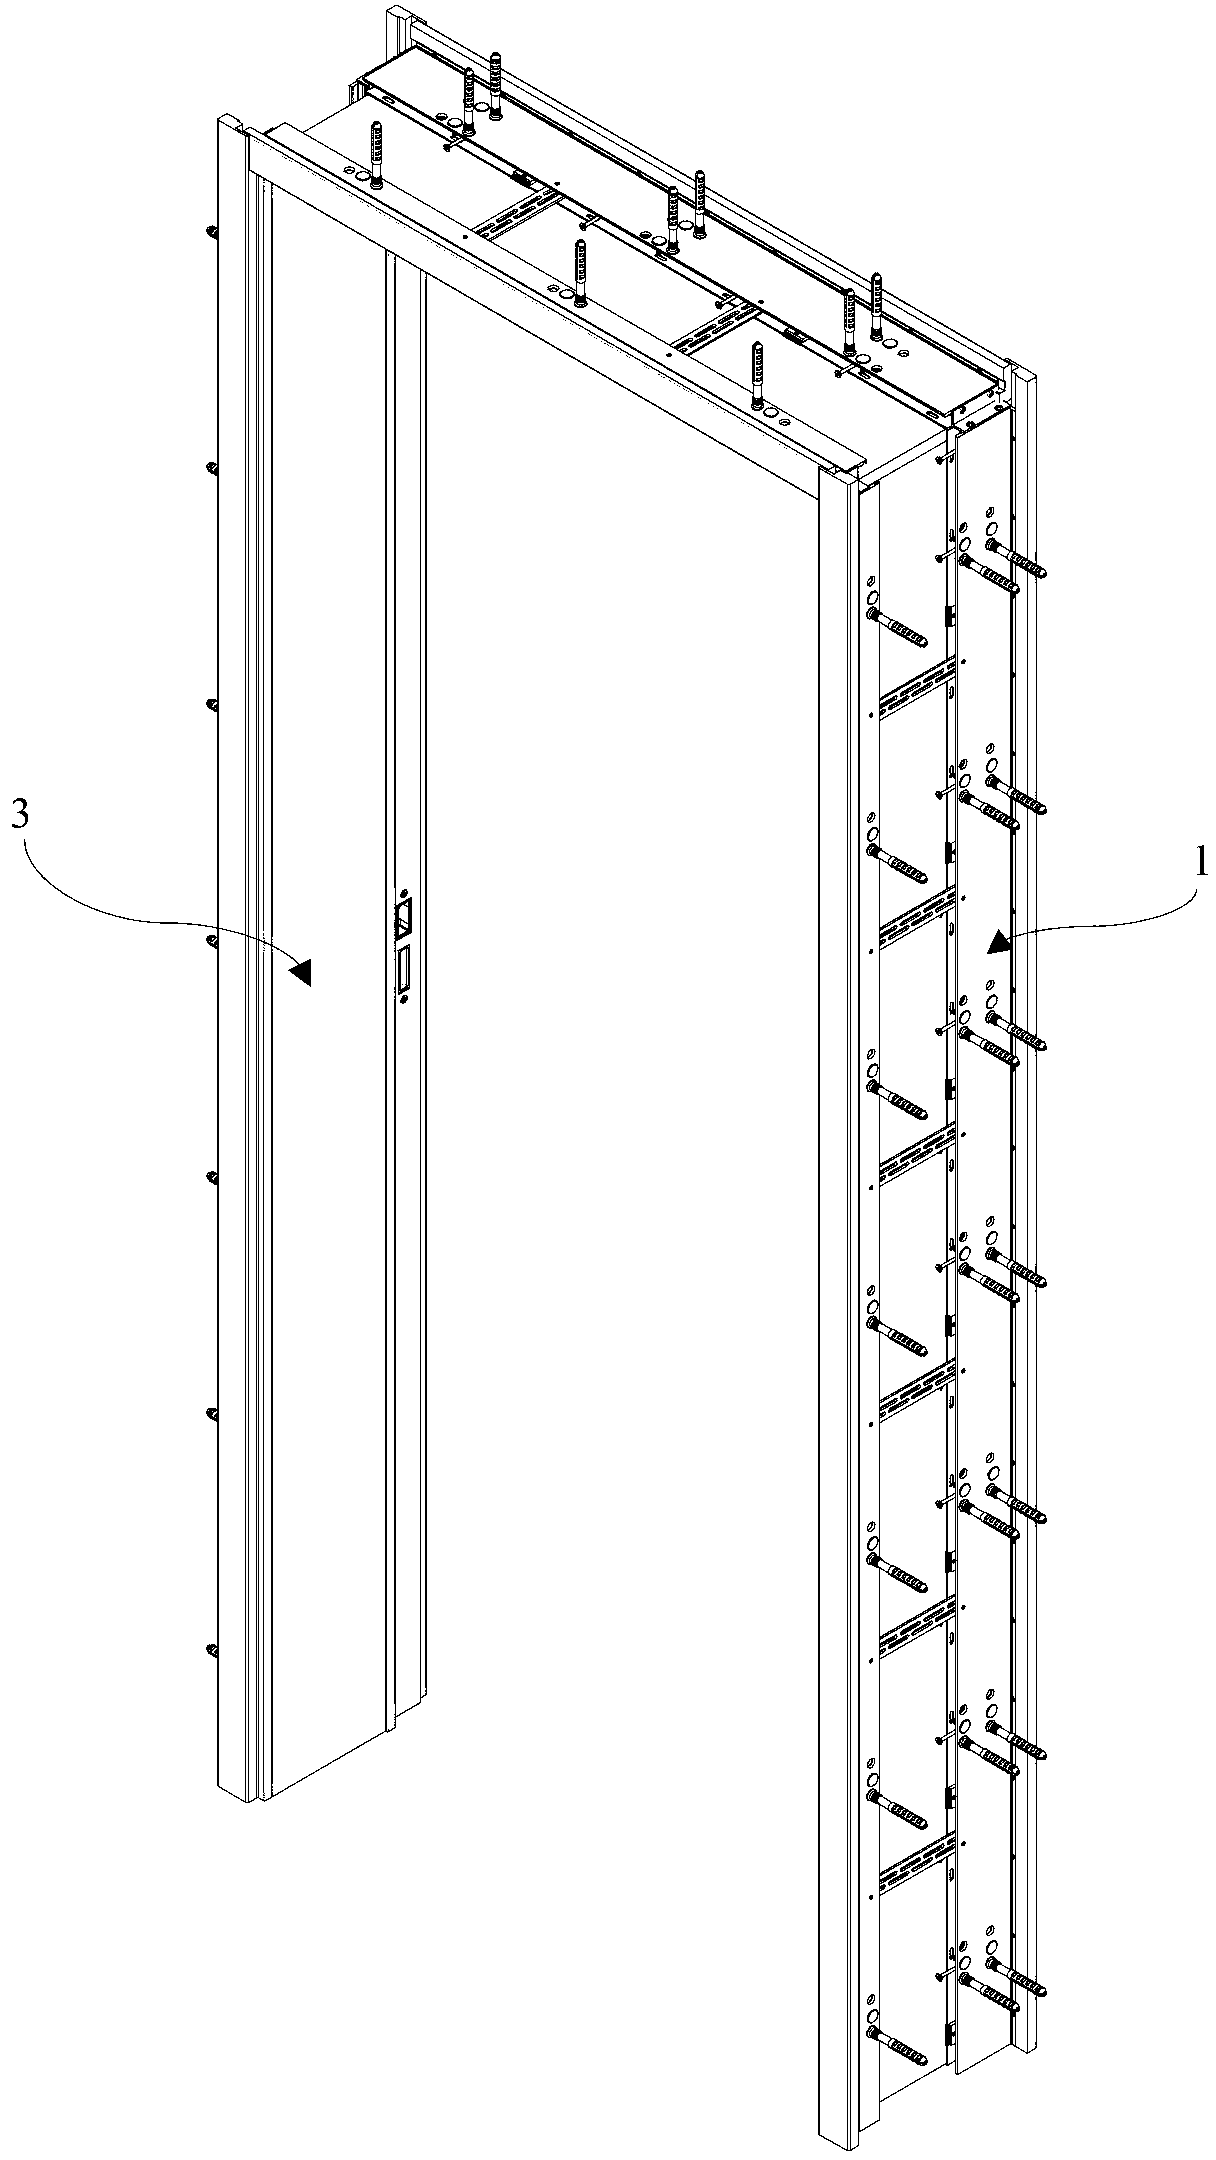 Finished vertical hinged door window frame and method for mounting door window frame